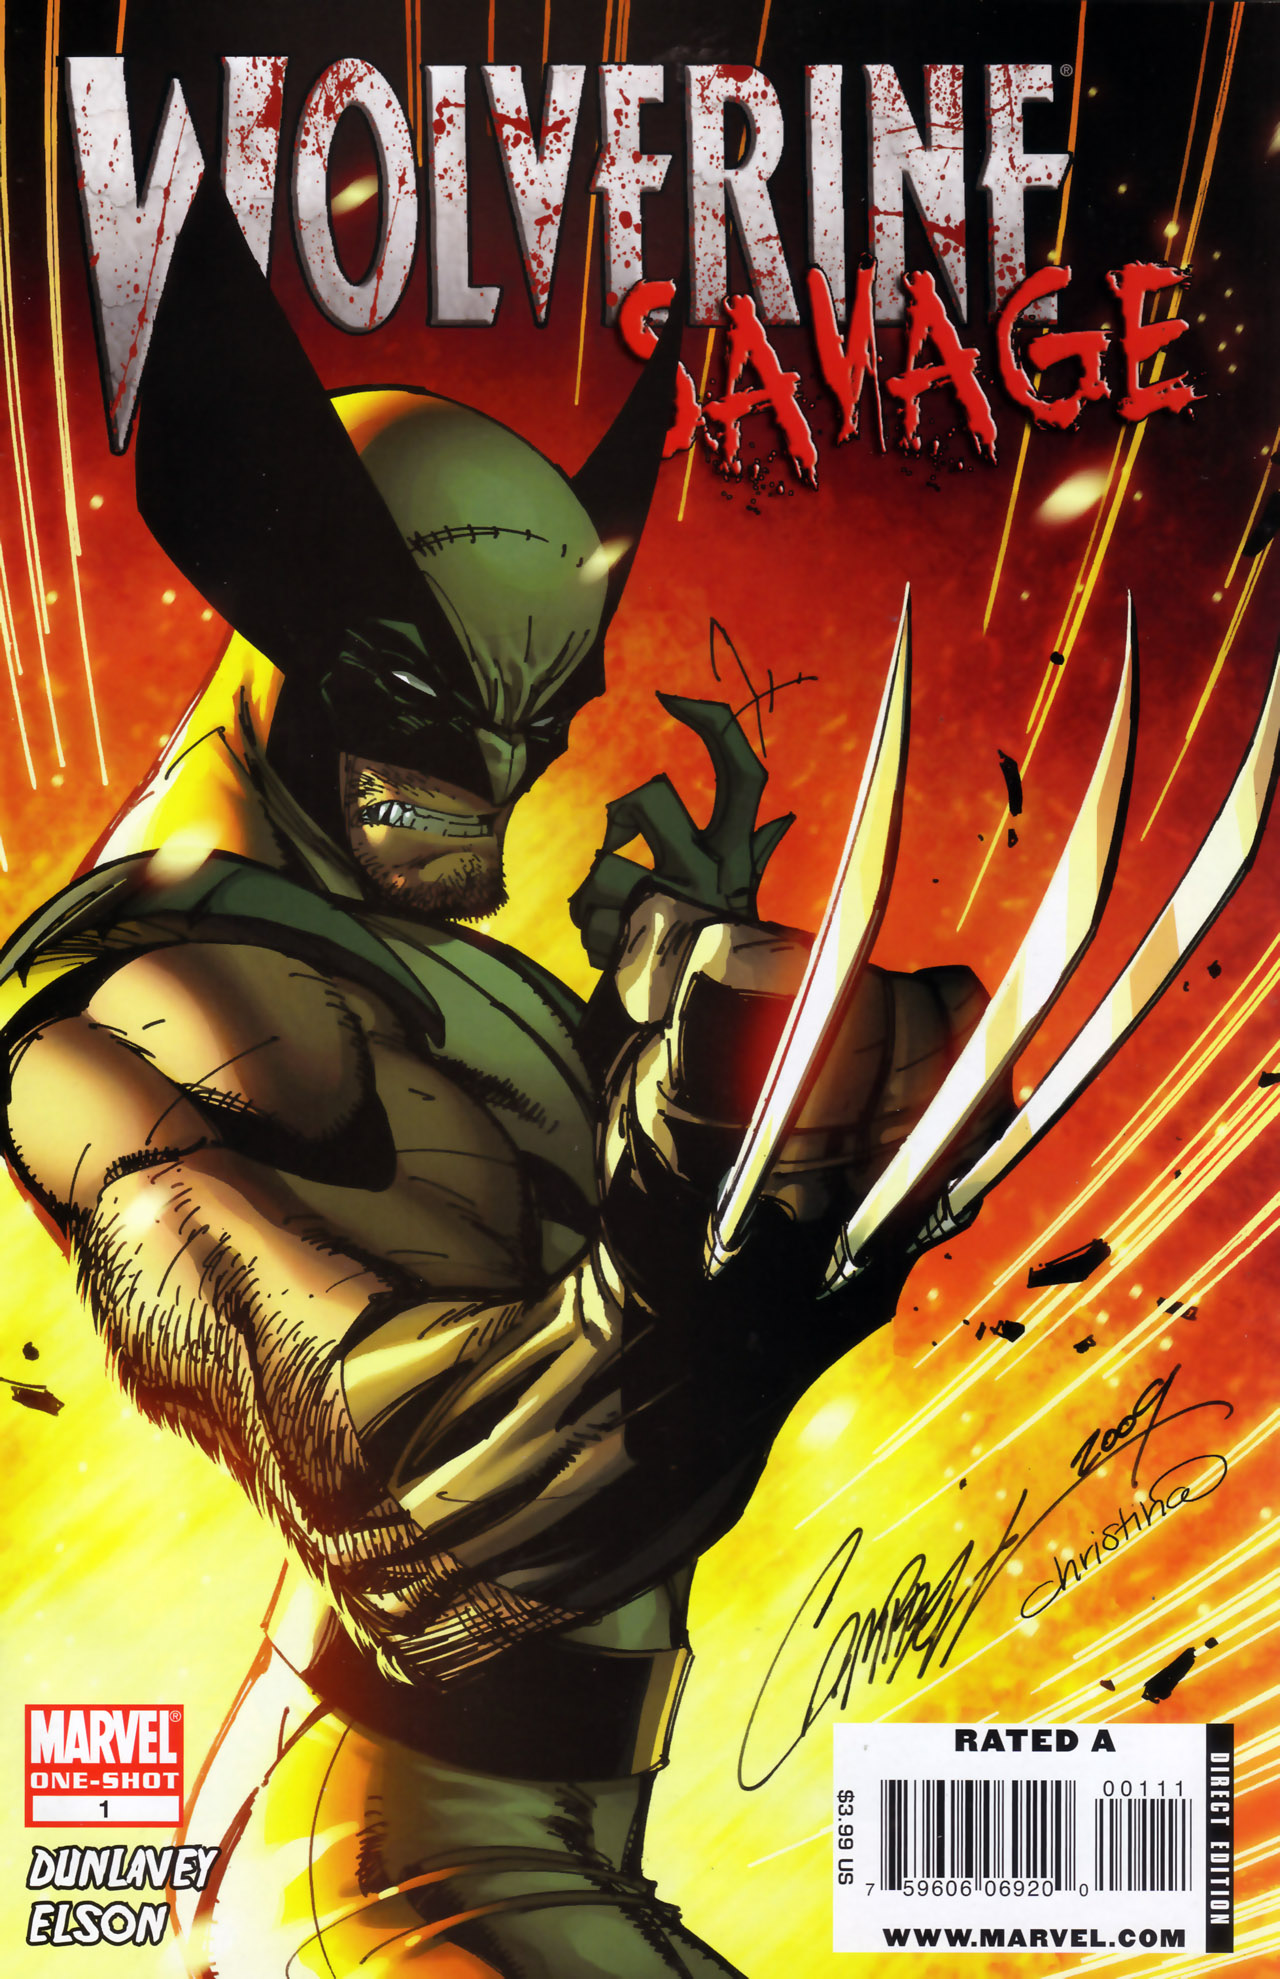 Read online Wolverine: Savage comic -  Issue # Full - 1